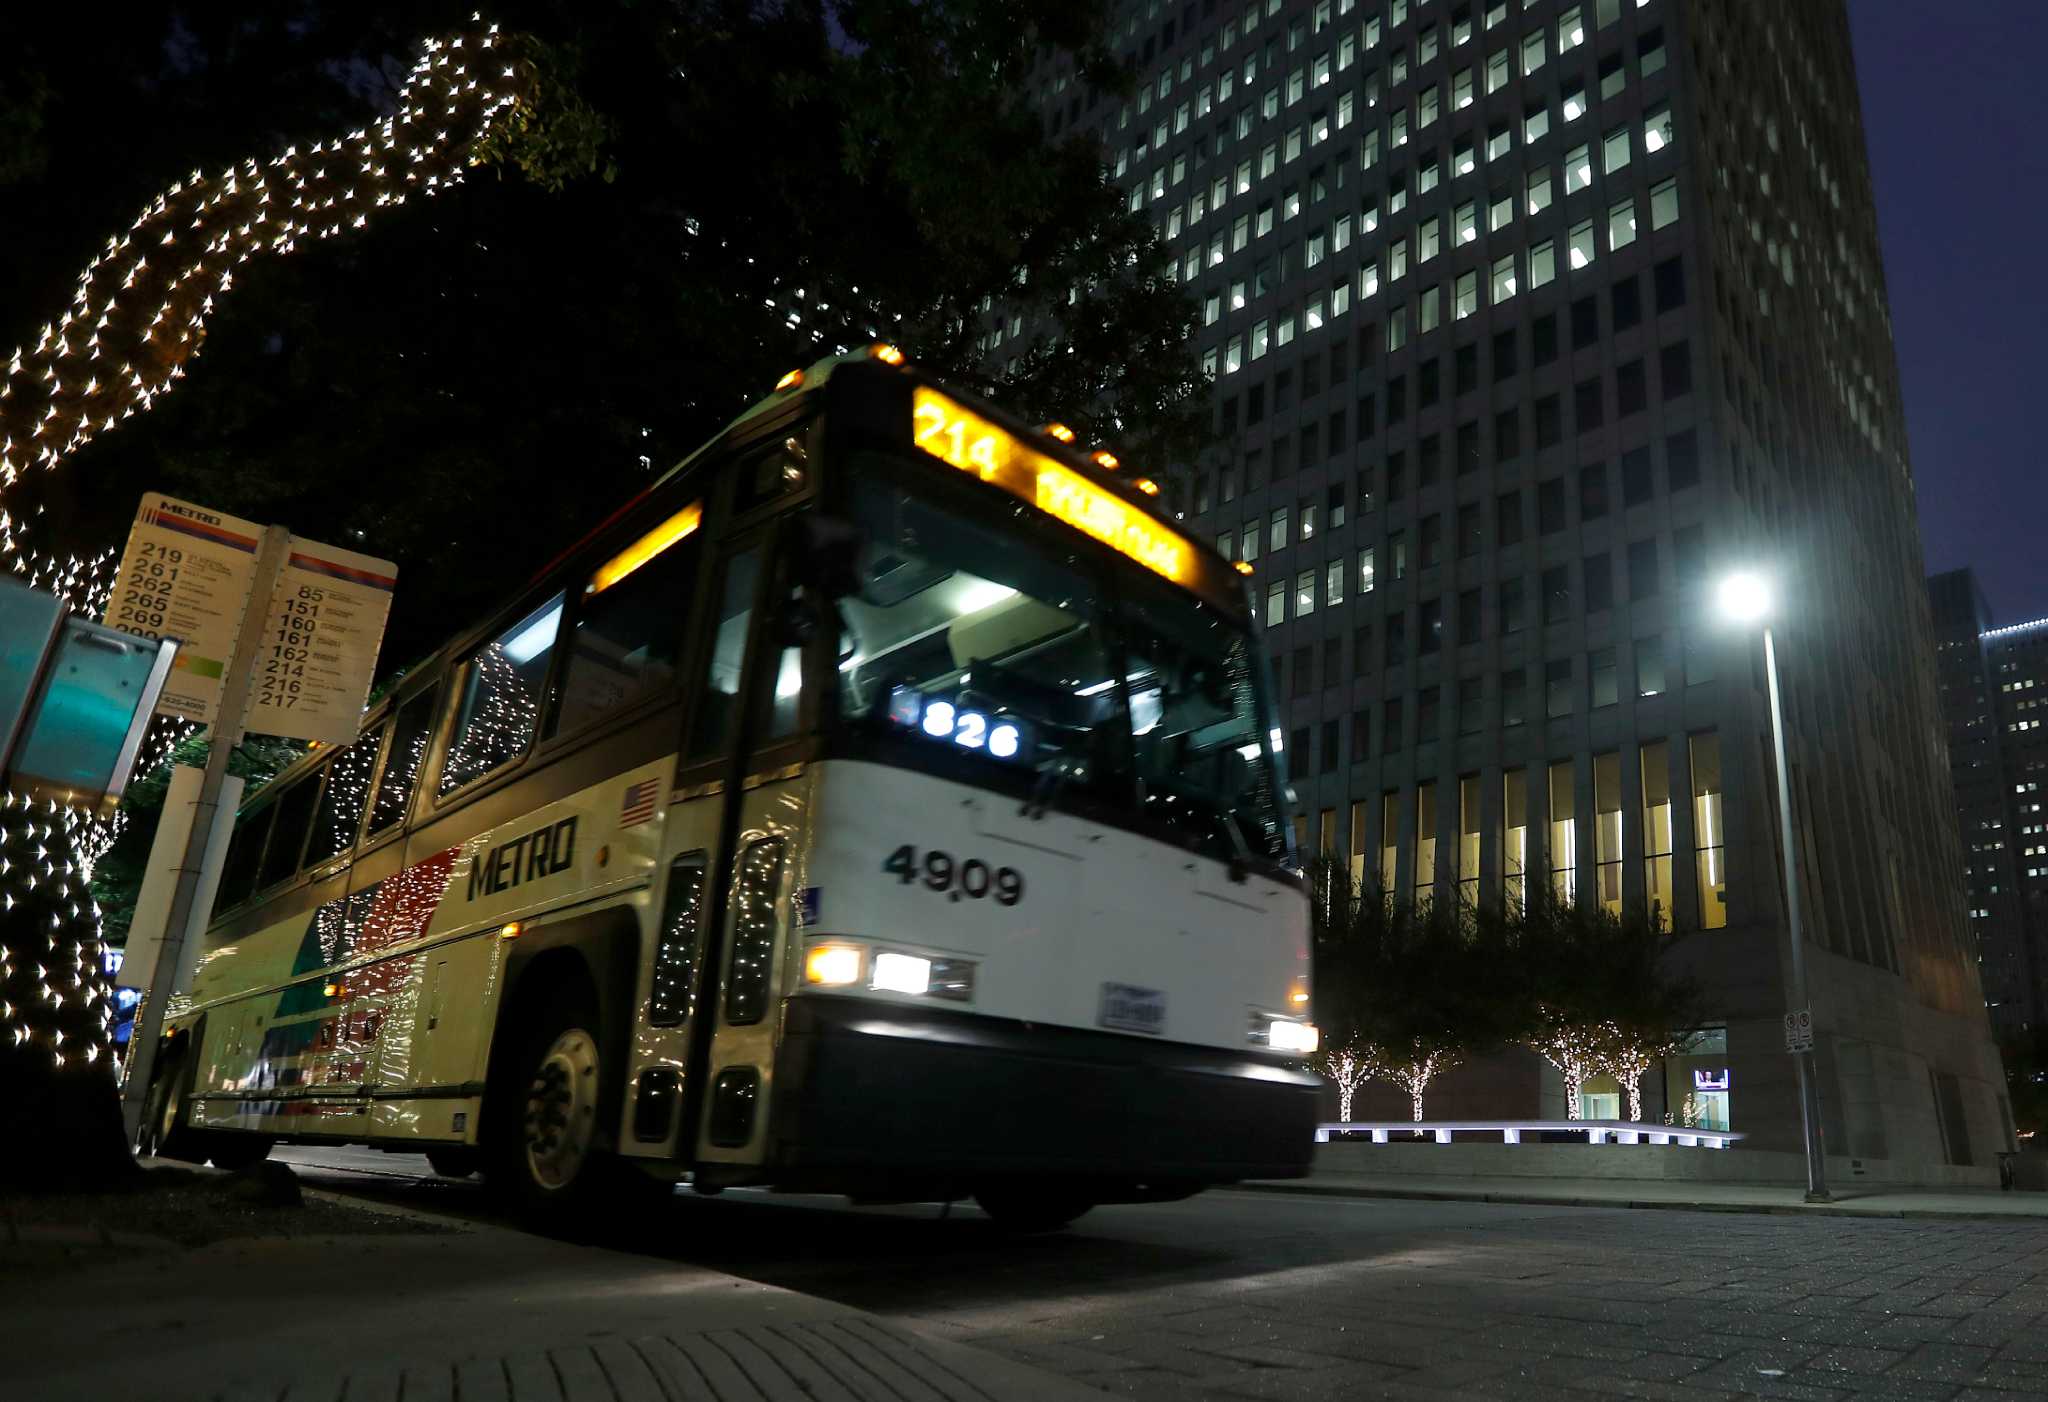 Metro approves plan to streamline bus service to and from Galveston